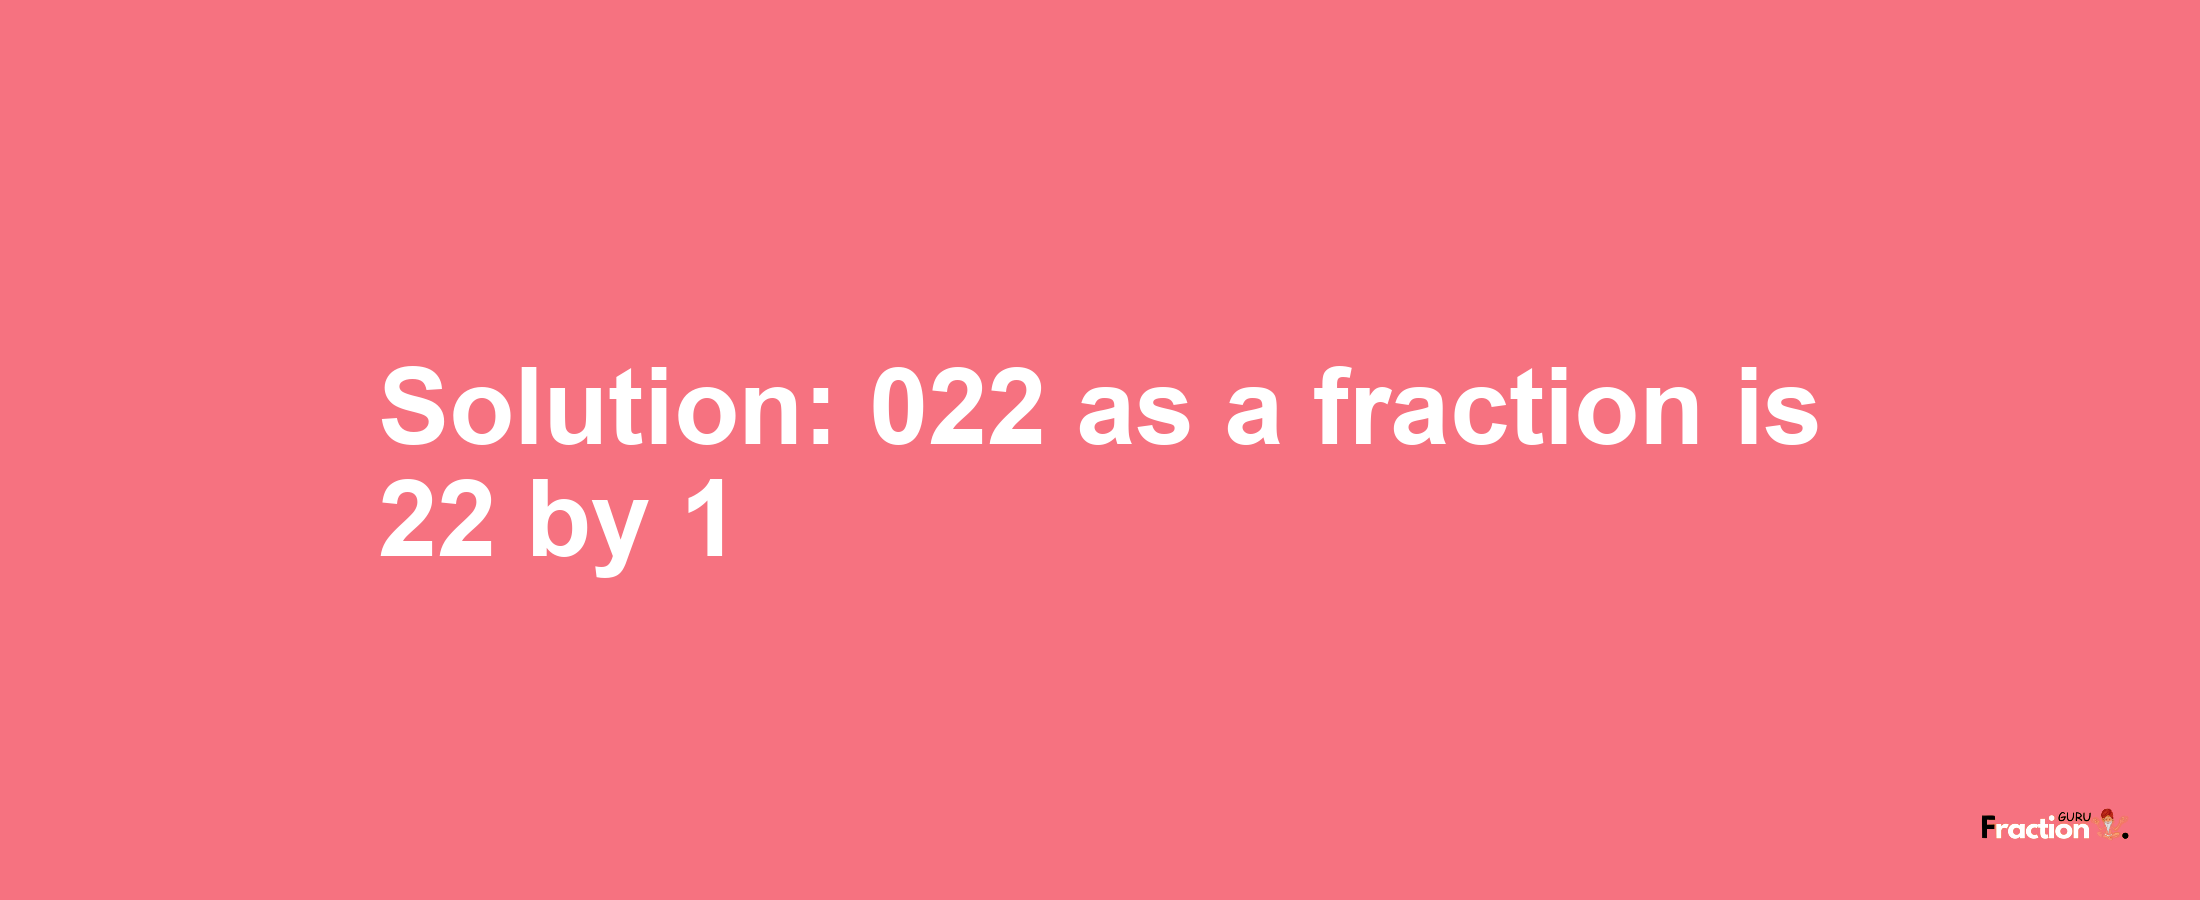 Solution:022 as a fraction is 22/1